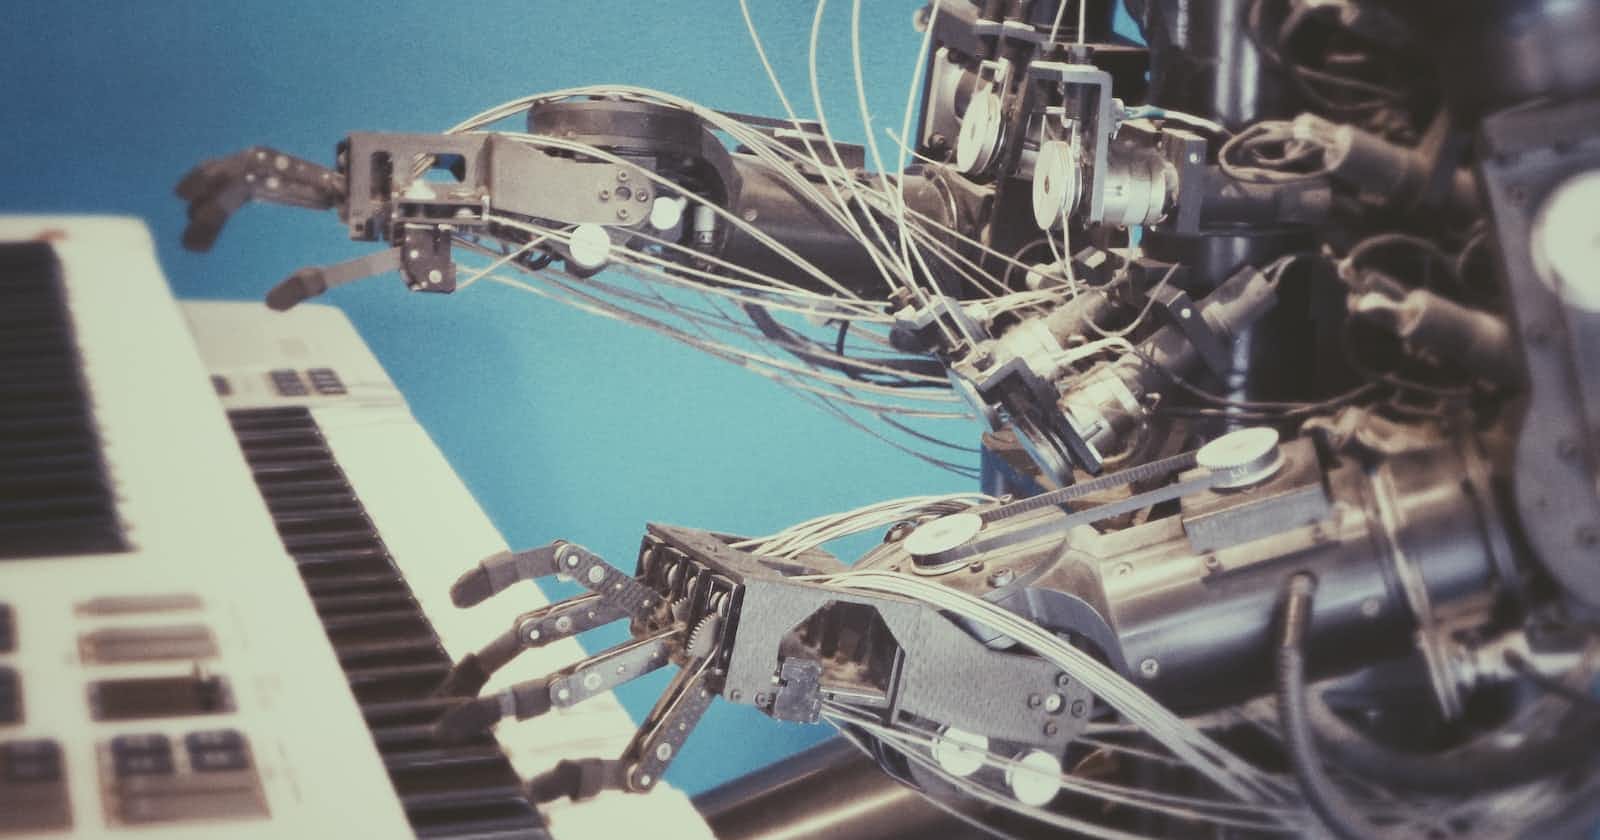 The Ethics Of AI: Why We Should Be Concerned About The Development Of Artificial Intelligence